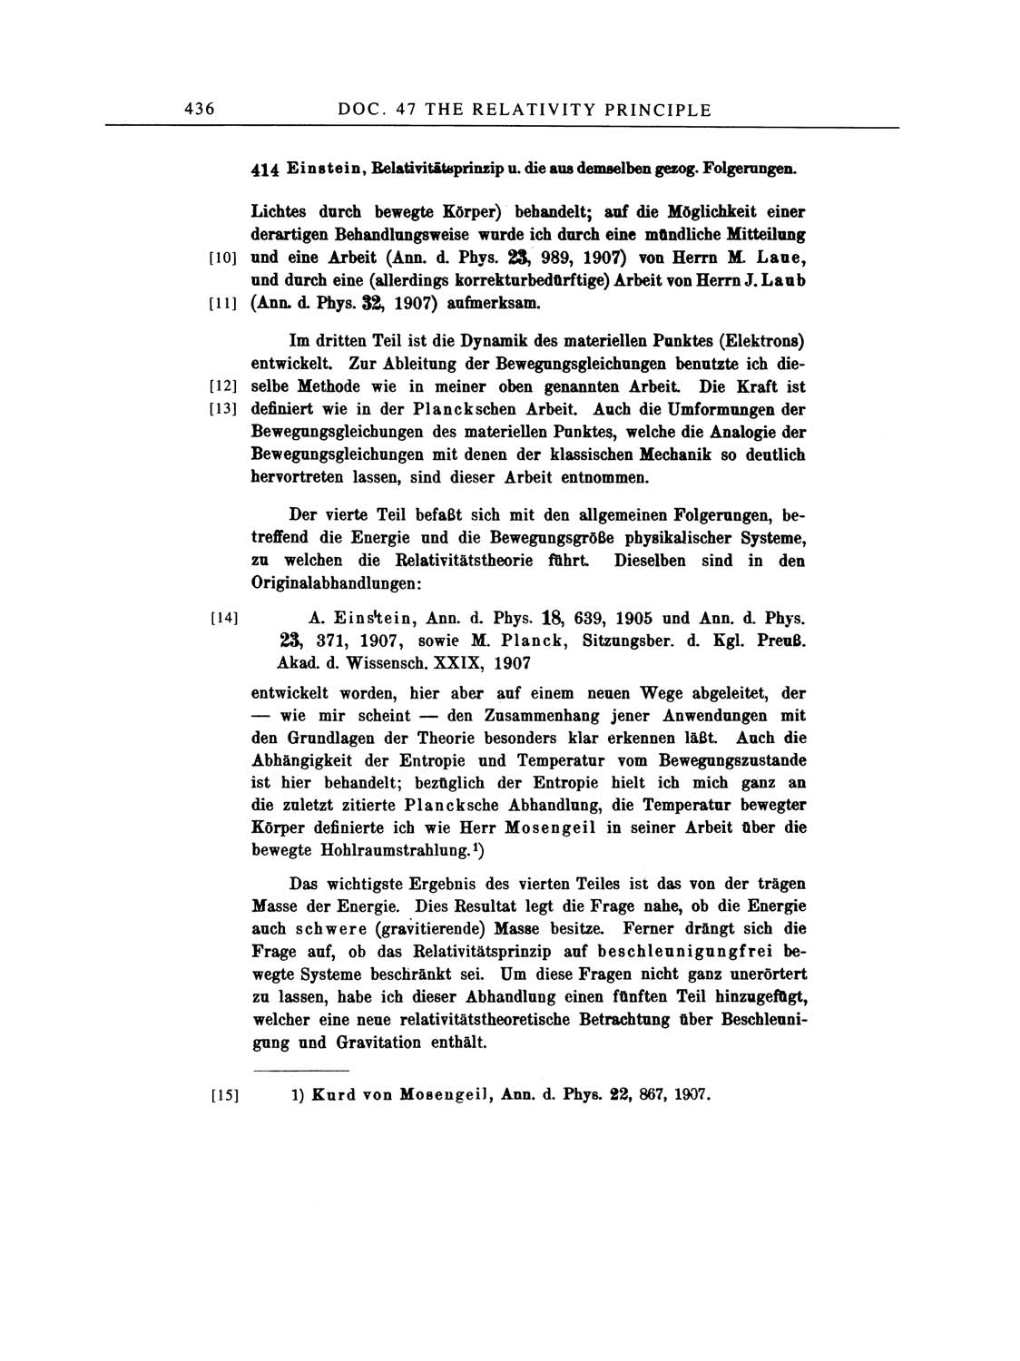 Volume 2: The Swiss Years: Writings, 1900-1909 page 436